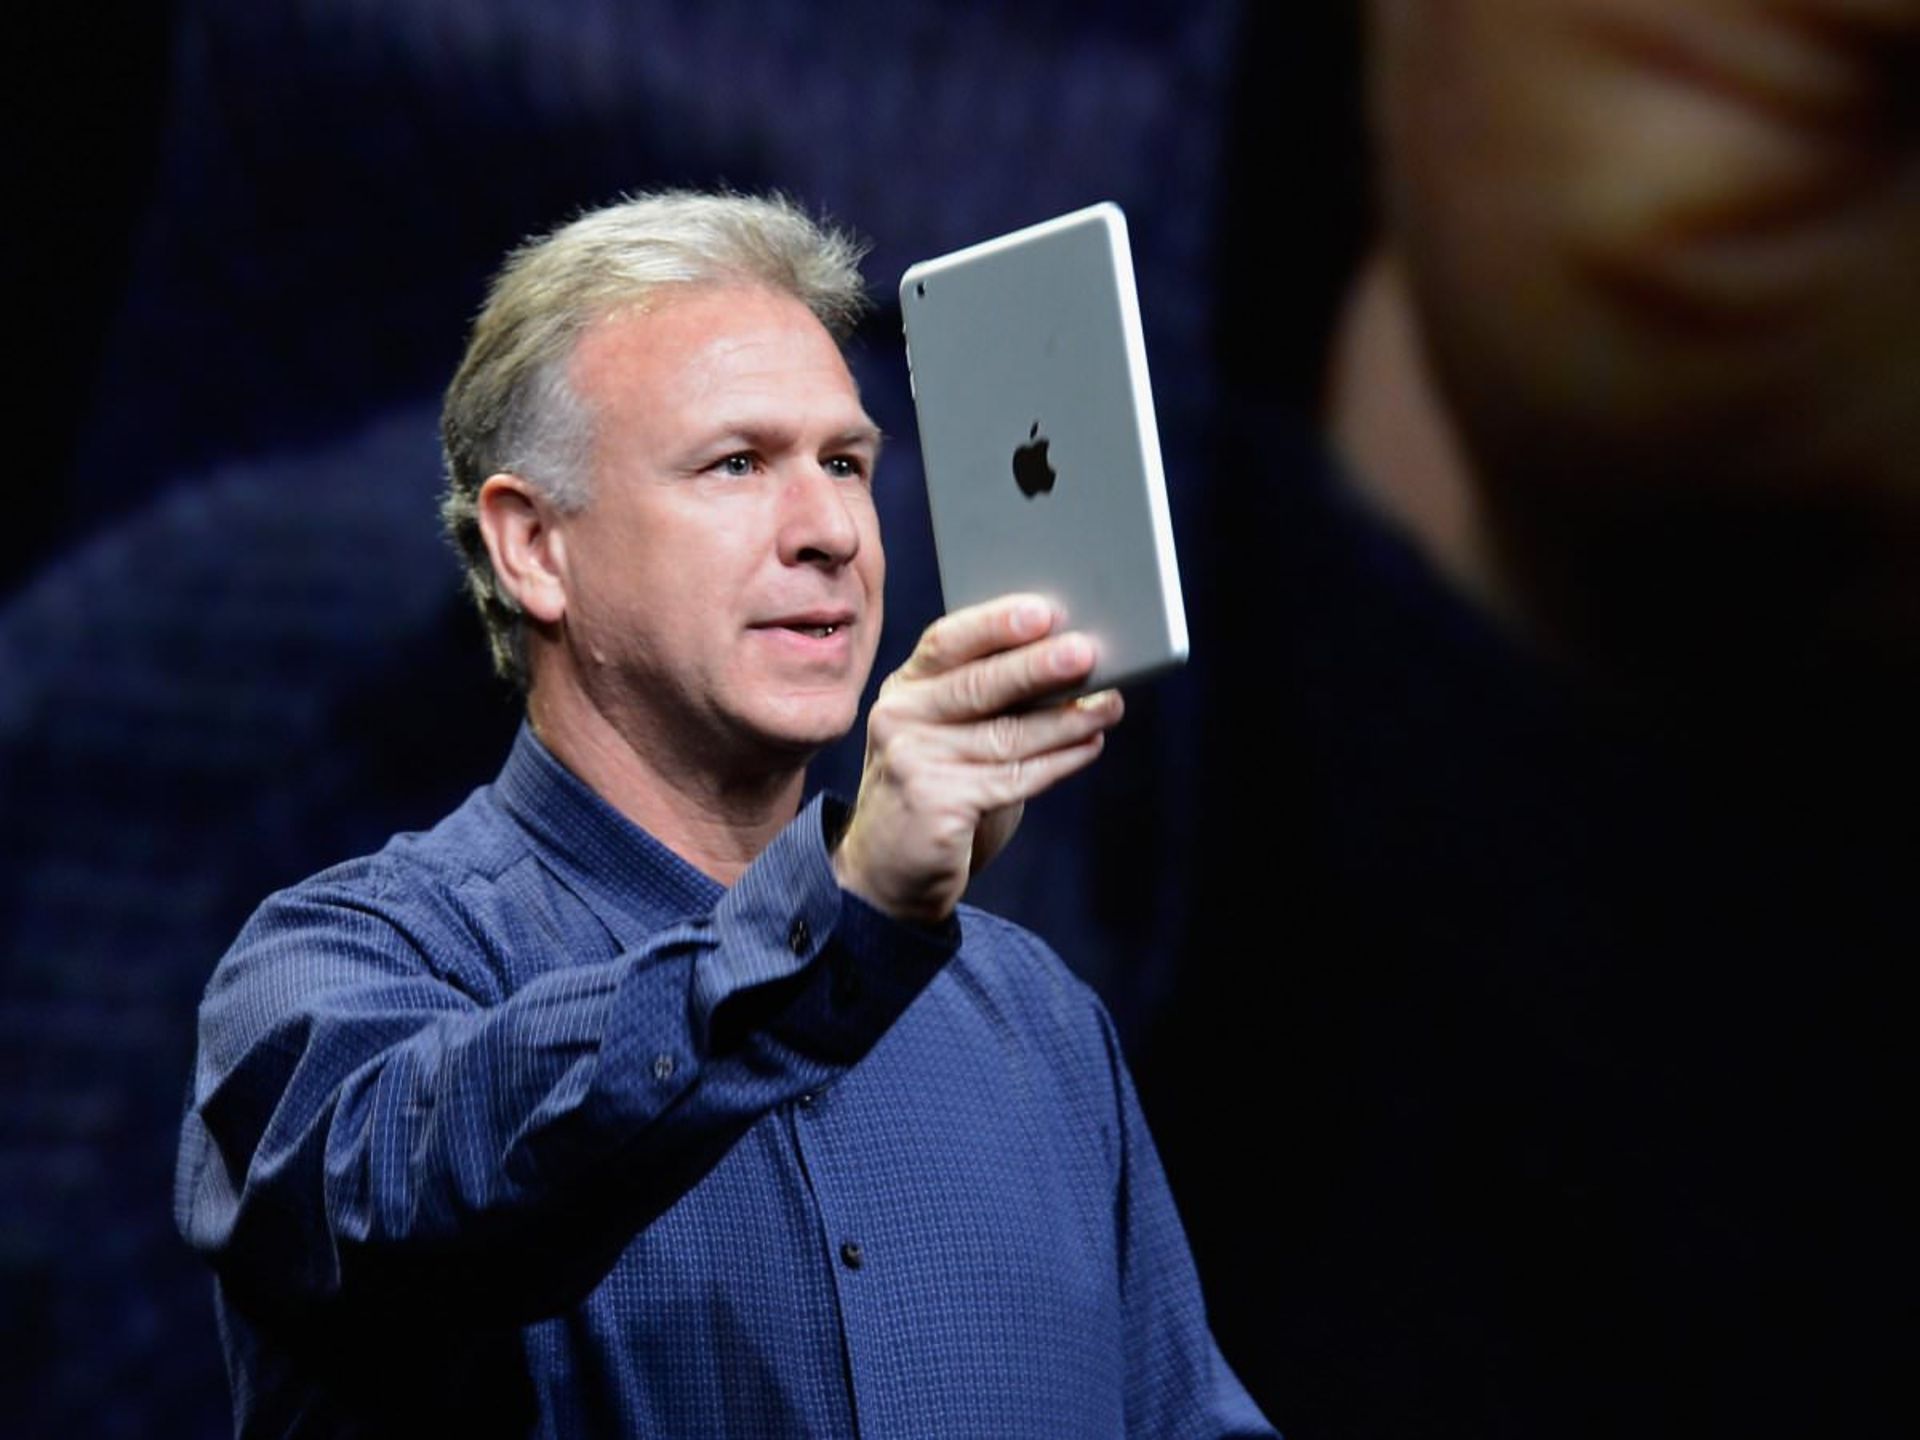 jobs-said-he-was-anti-small-tablets-but-apple-made-the-ipad-mini